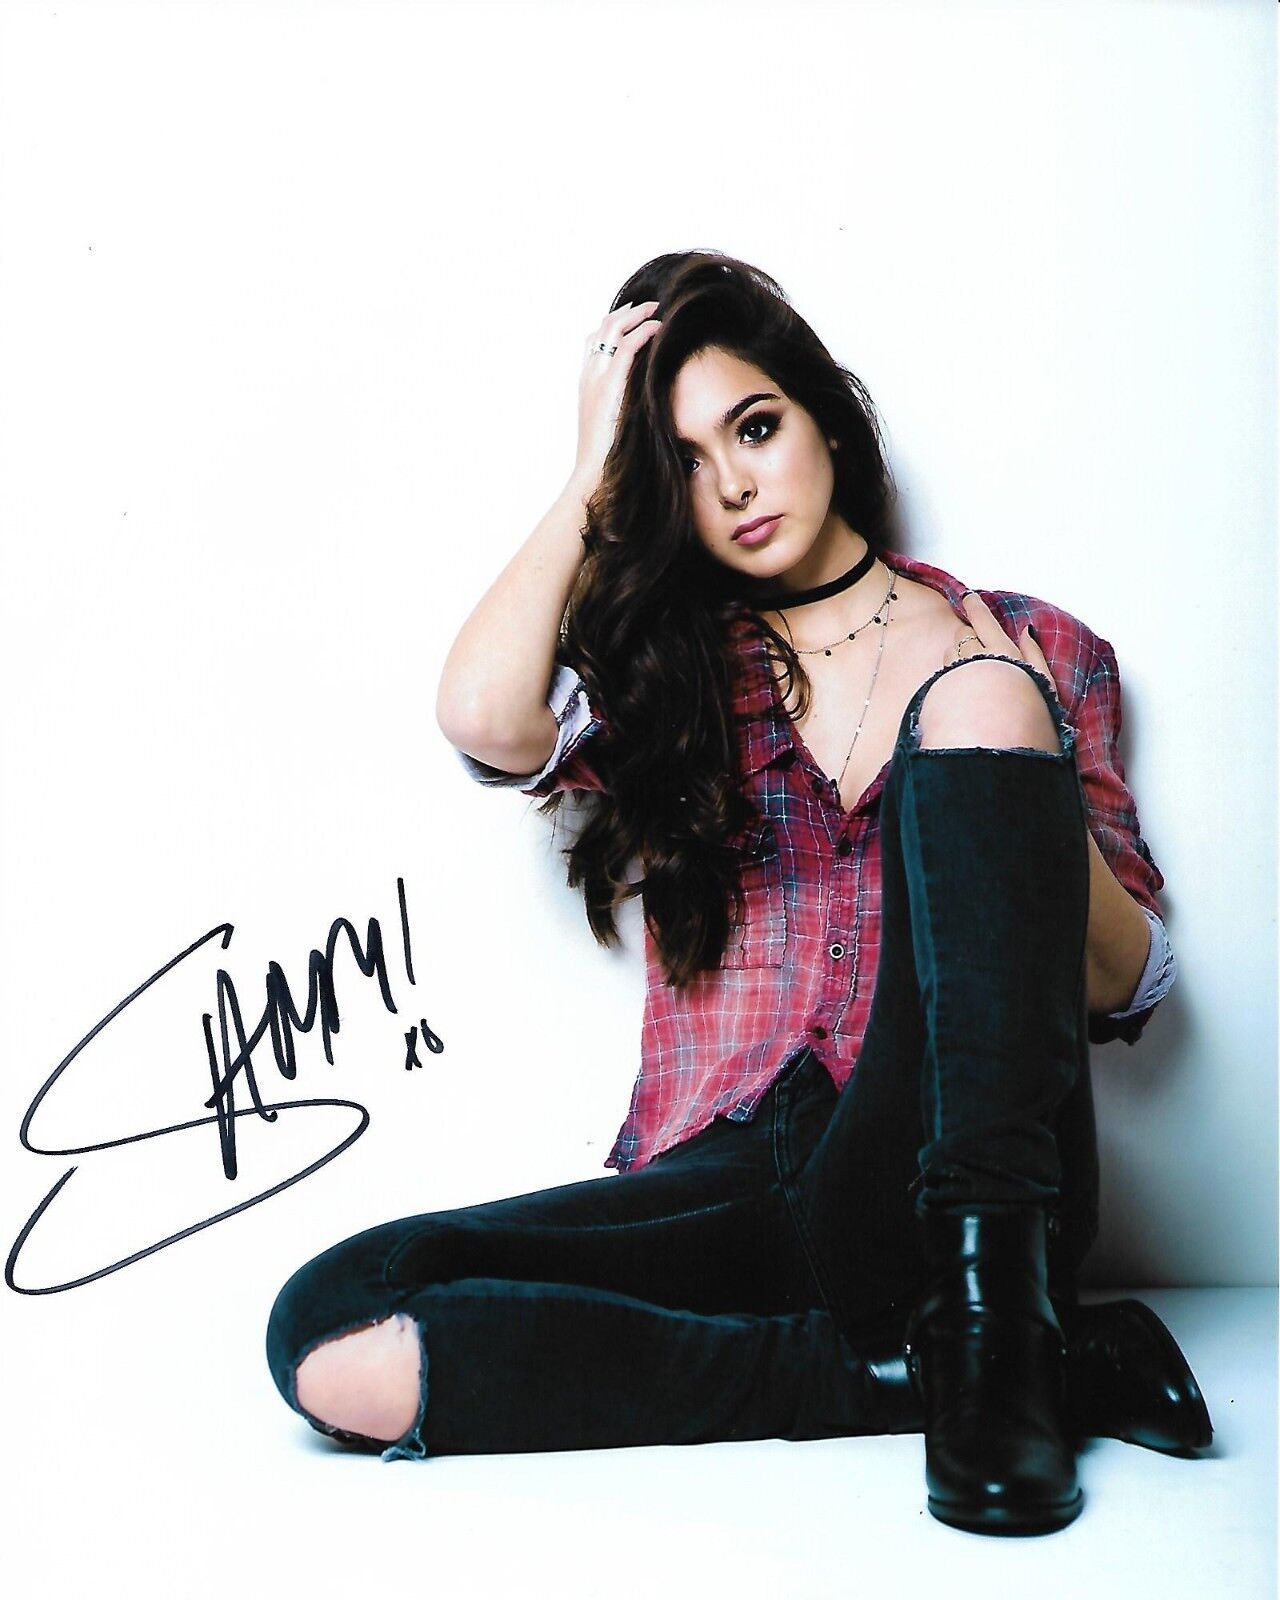 Sammi Sanchez latin pop singer REAL hand SIGNED 8x10 Photo Poster painting #1 COA Autographed